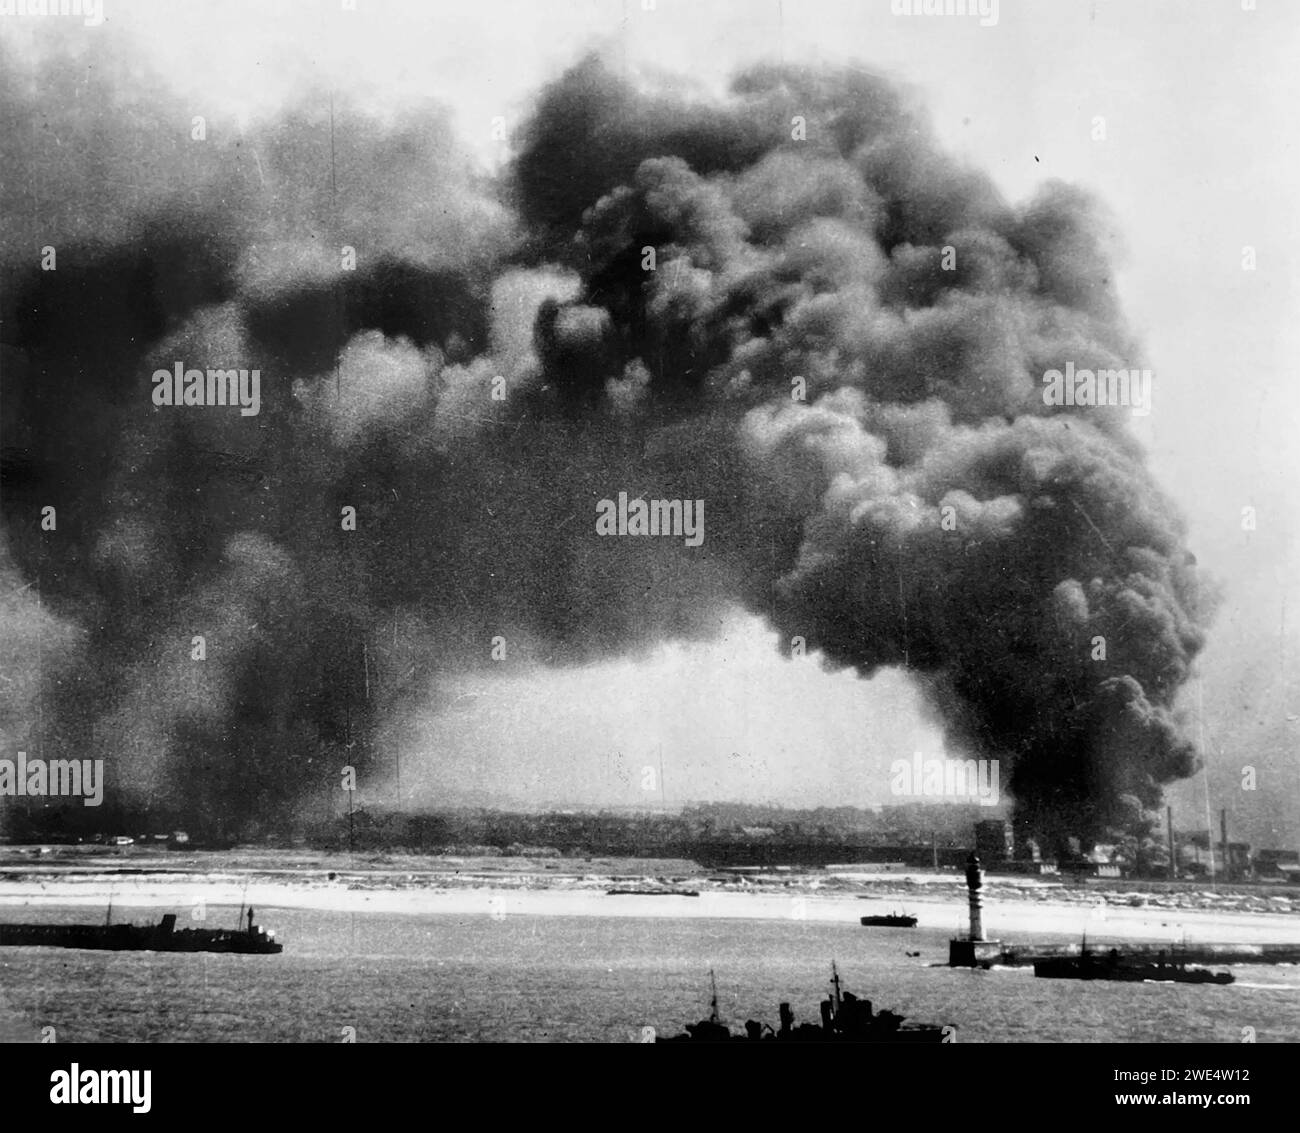 DUNKIRK EVACUATION - Operation Dynamo - 26 May-4 June 1940. Oil refinery on fire. Stock Photo